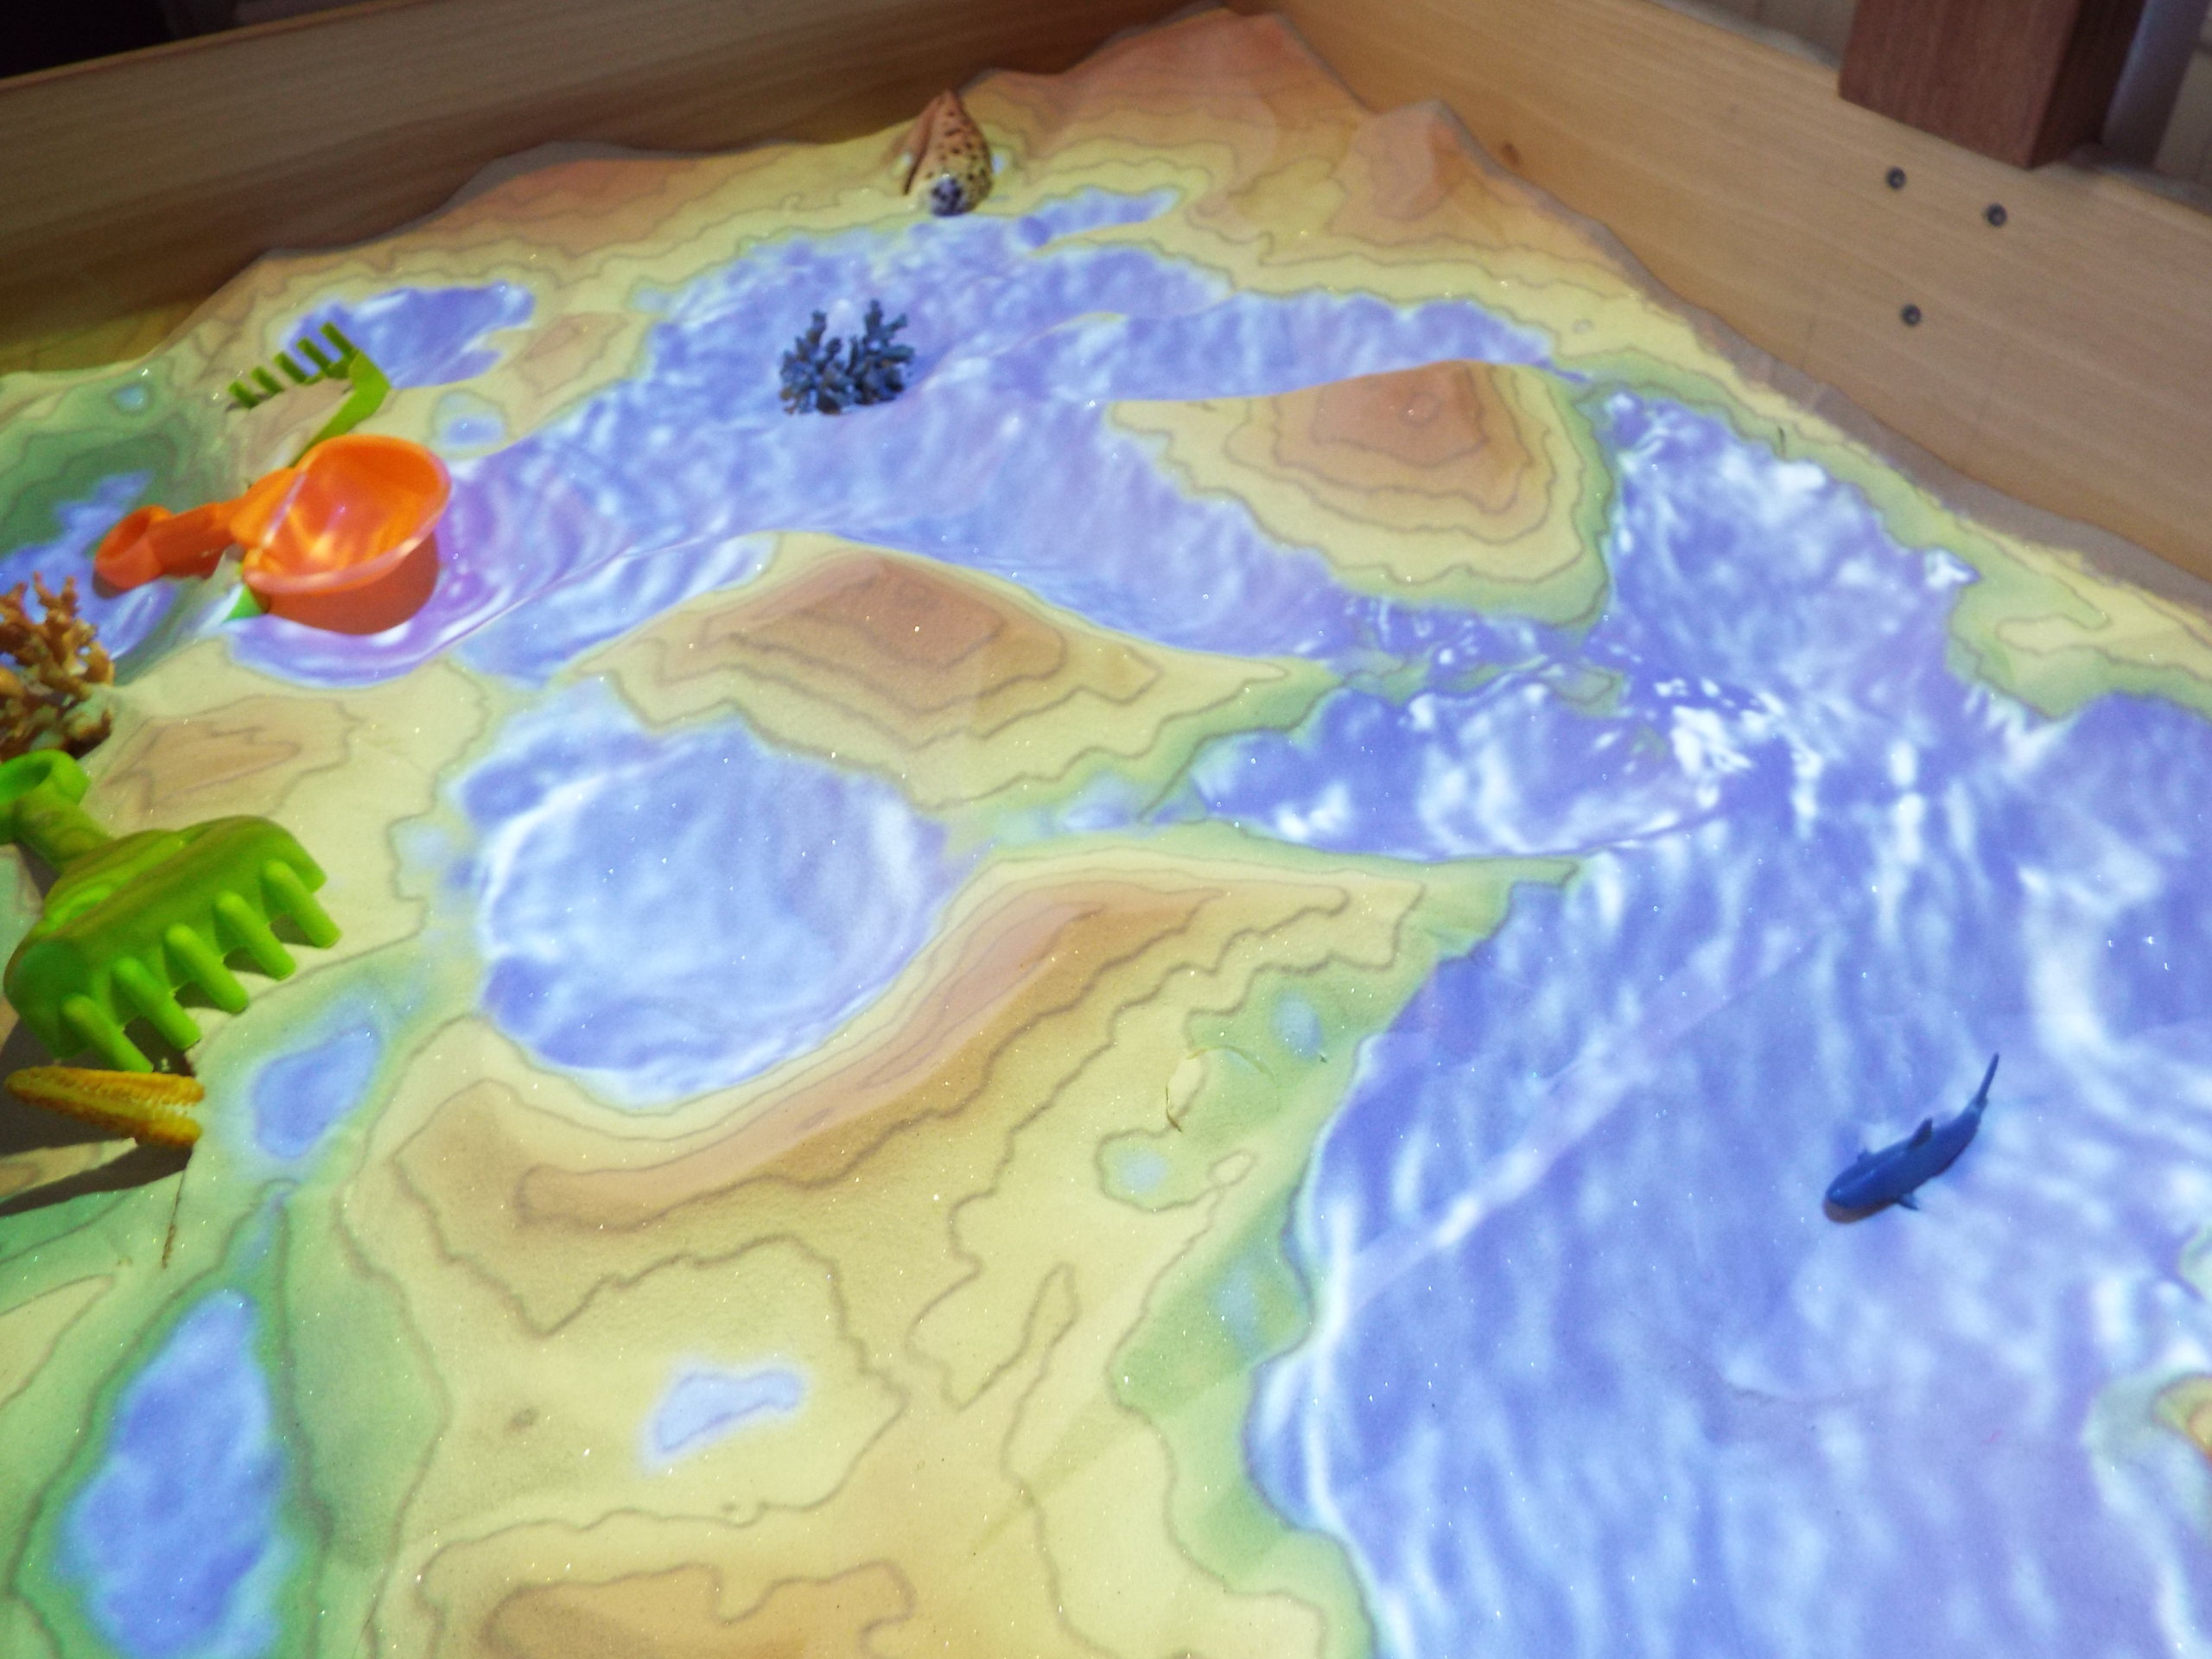 East End Seaport Museum's augmented sandbox